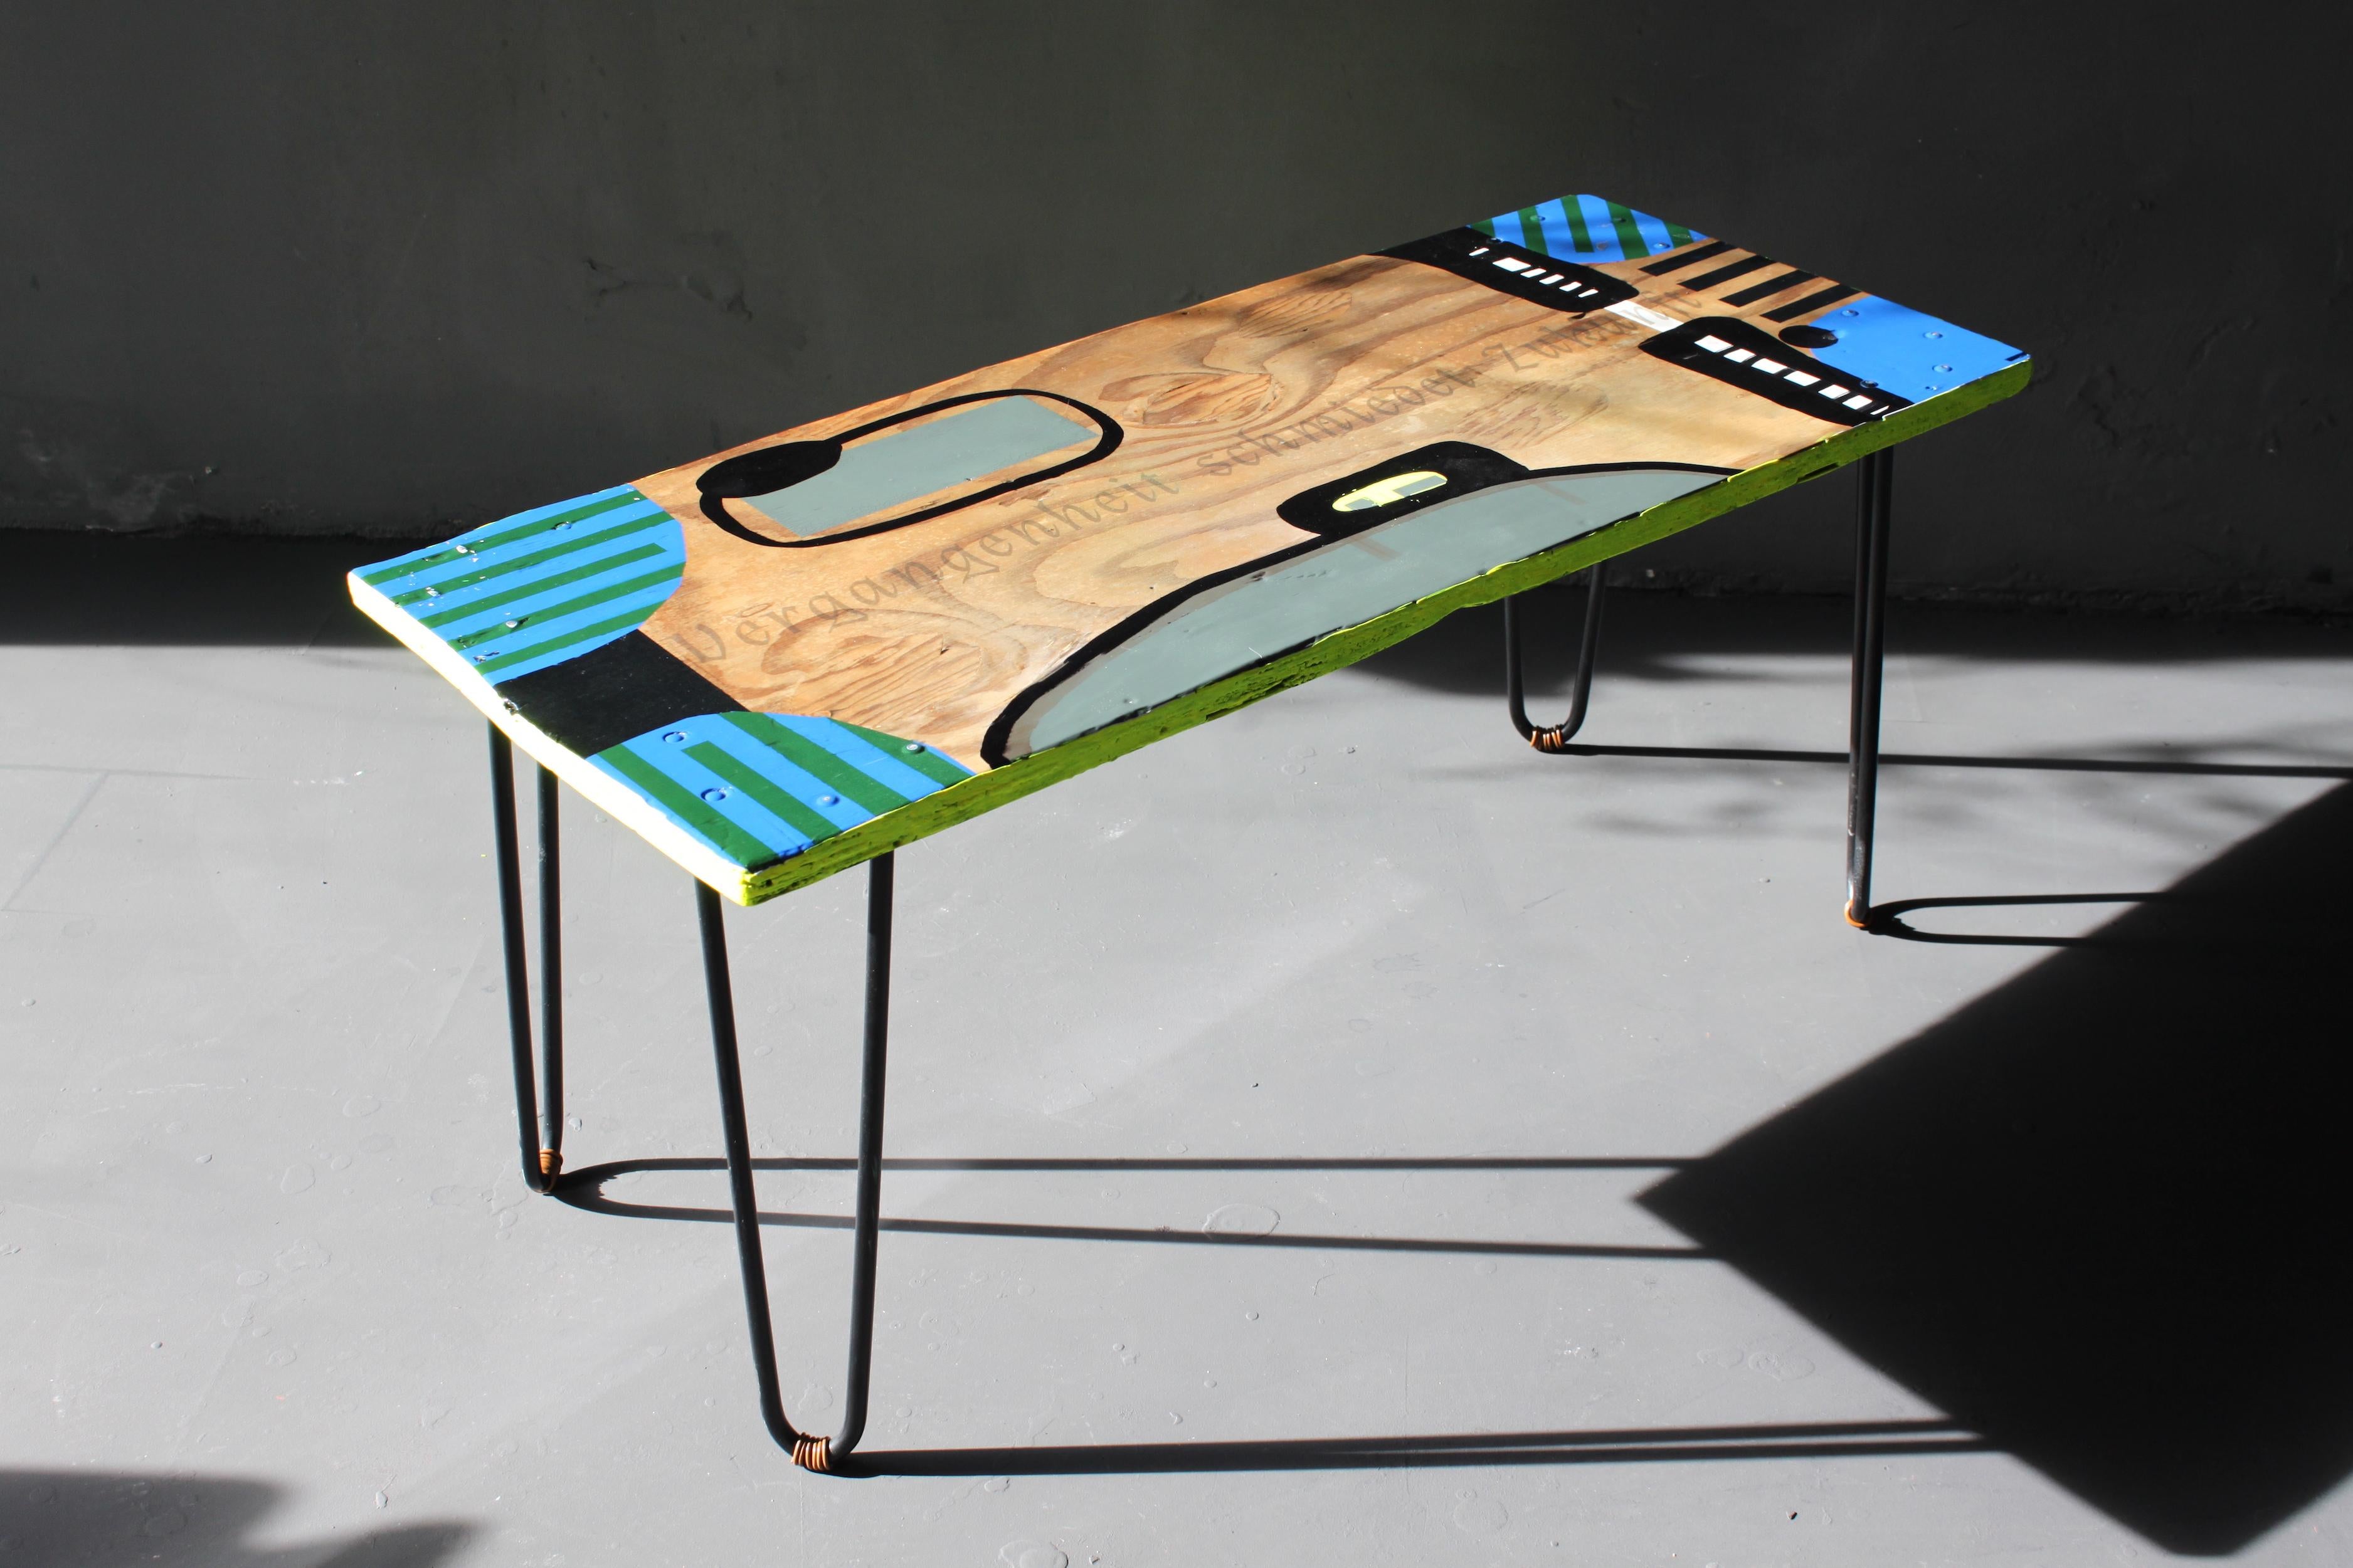 Painted and multi-lacquered with 2K lacquer, 60 Year old Plywood Table Top in different colors, Hairpin Feet. Contemporary pattern with added words of true meaning. 